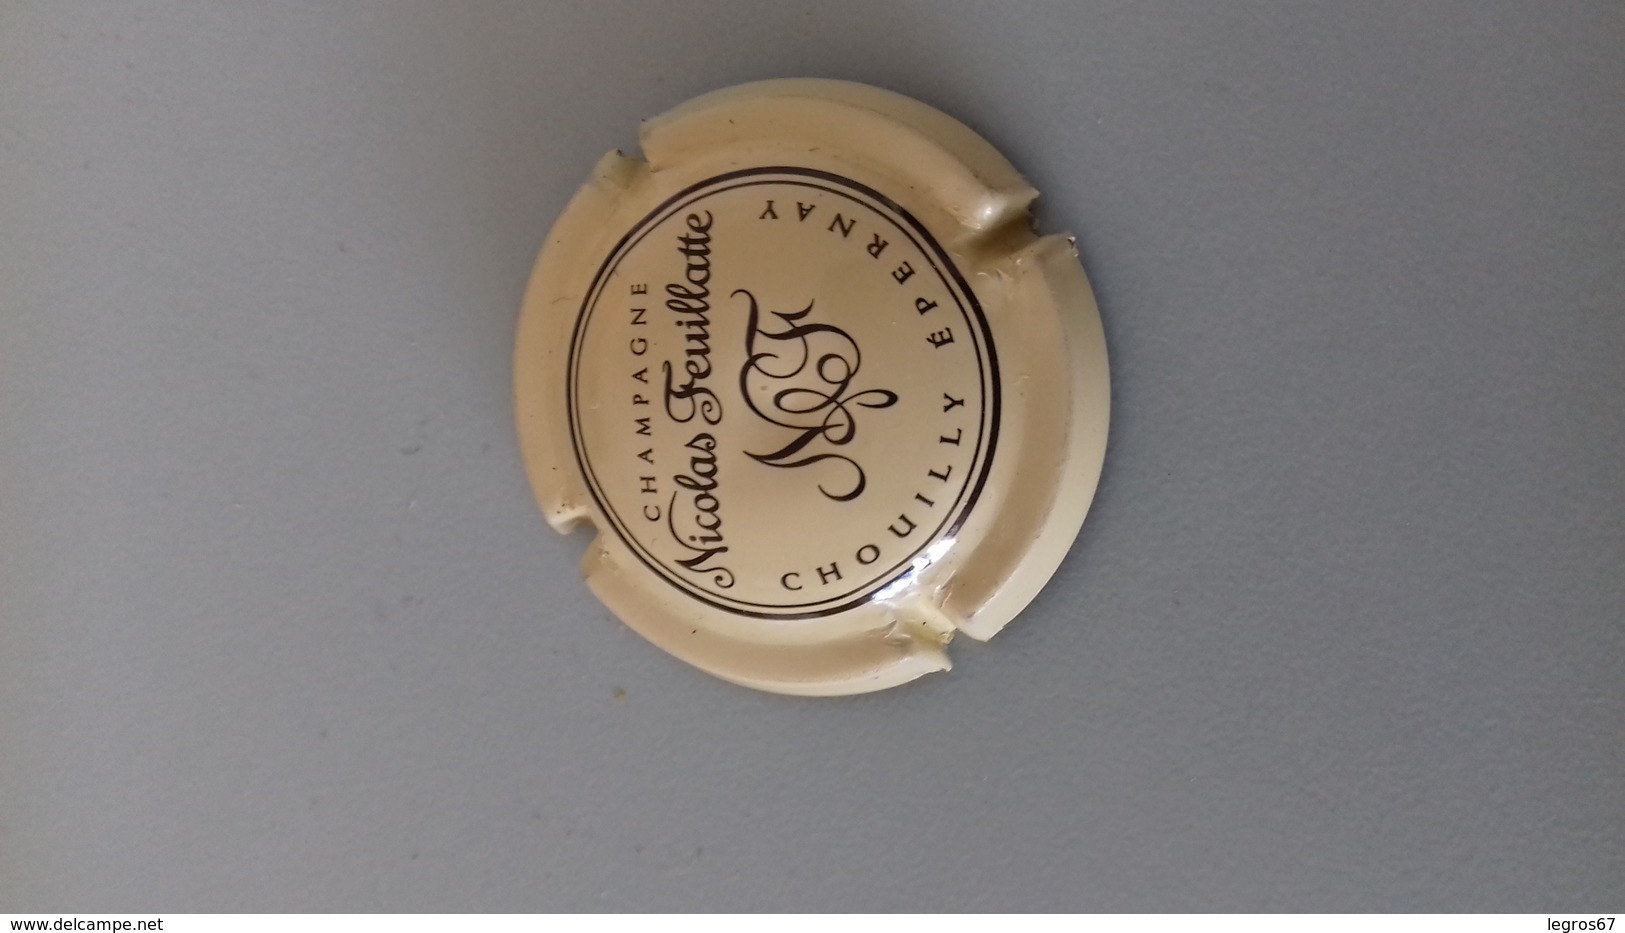 MUSELET CHAMPAGNE NICOLAS FEUILLATTE CREME - Feuillate